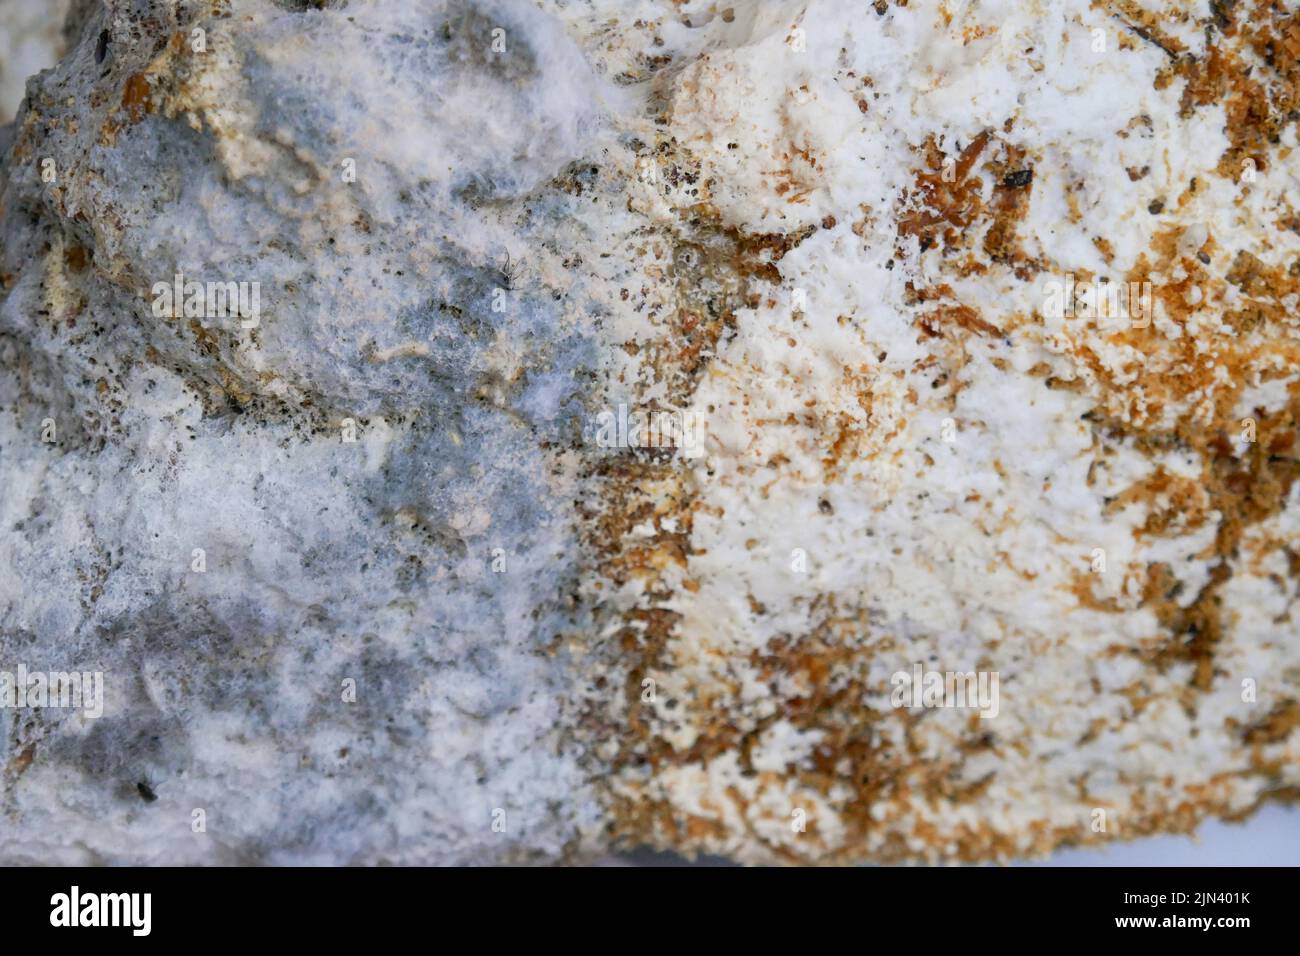 fungal diseases.Mold fungus wall surface. Mold close-up. Mold texture. Gray and brown mold close-up. Stock Photo